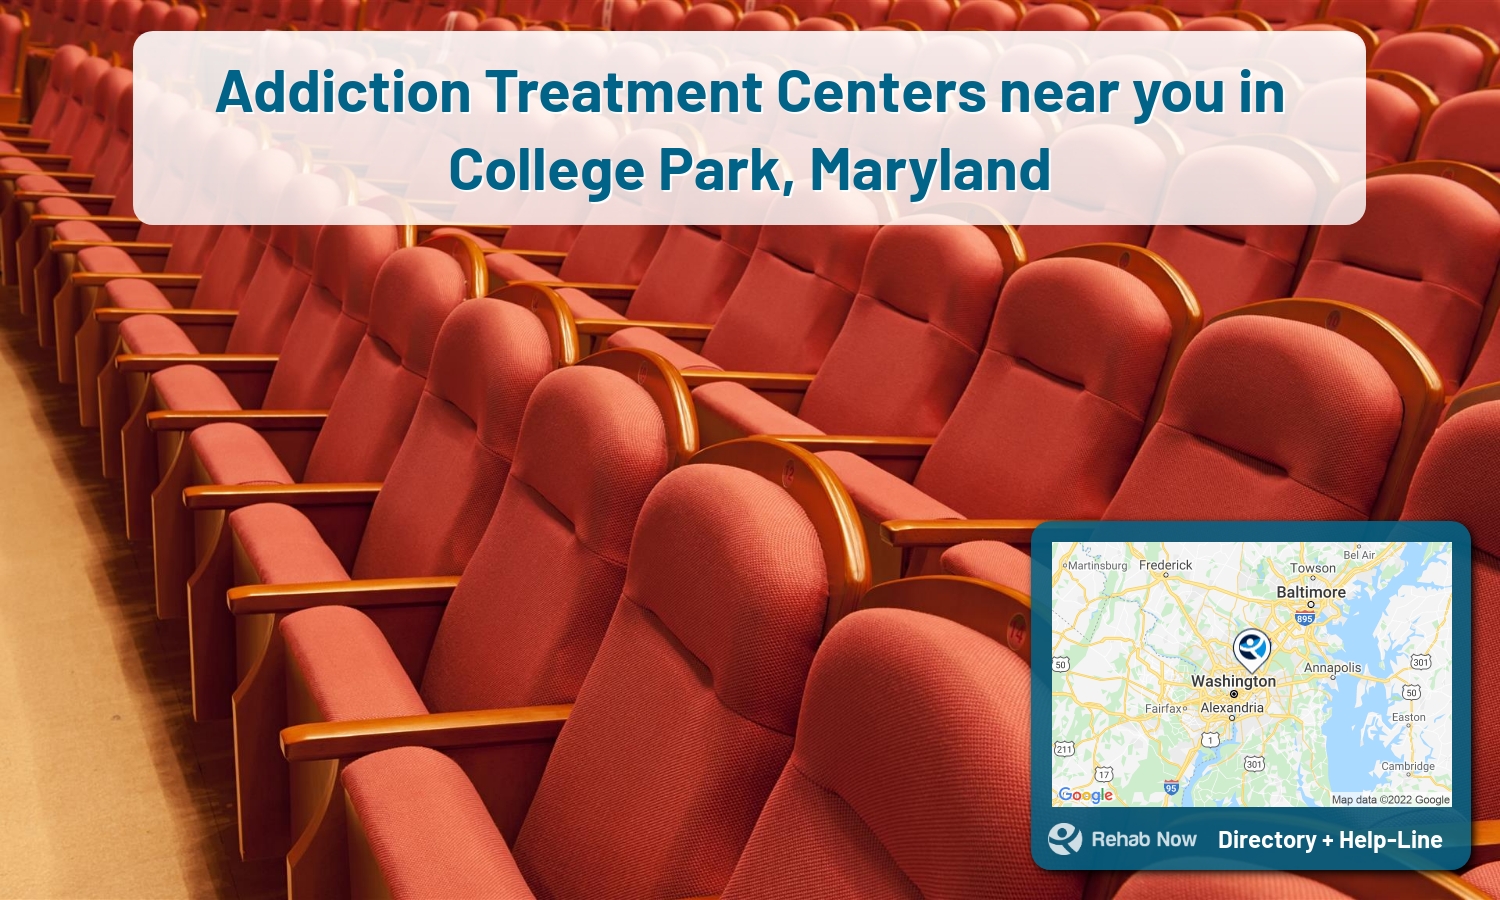 Those struggling with addiction can find help through addiction rehab facilities in College Park, MD. Get help now!